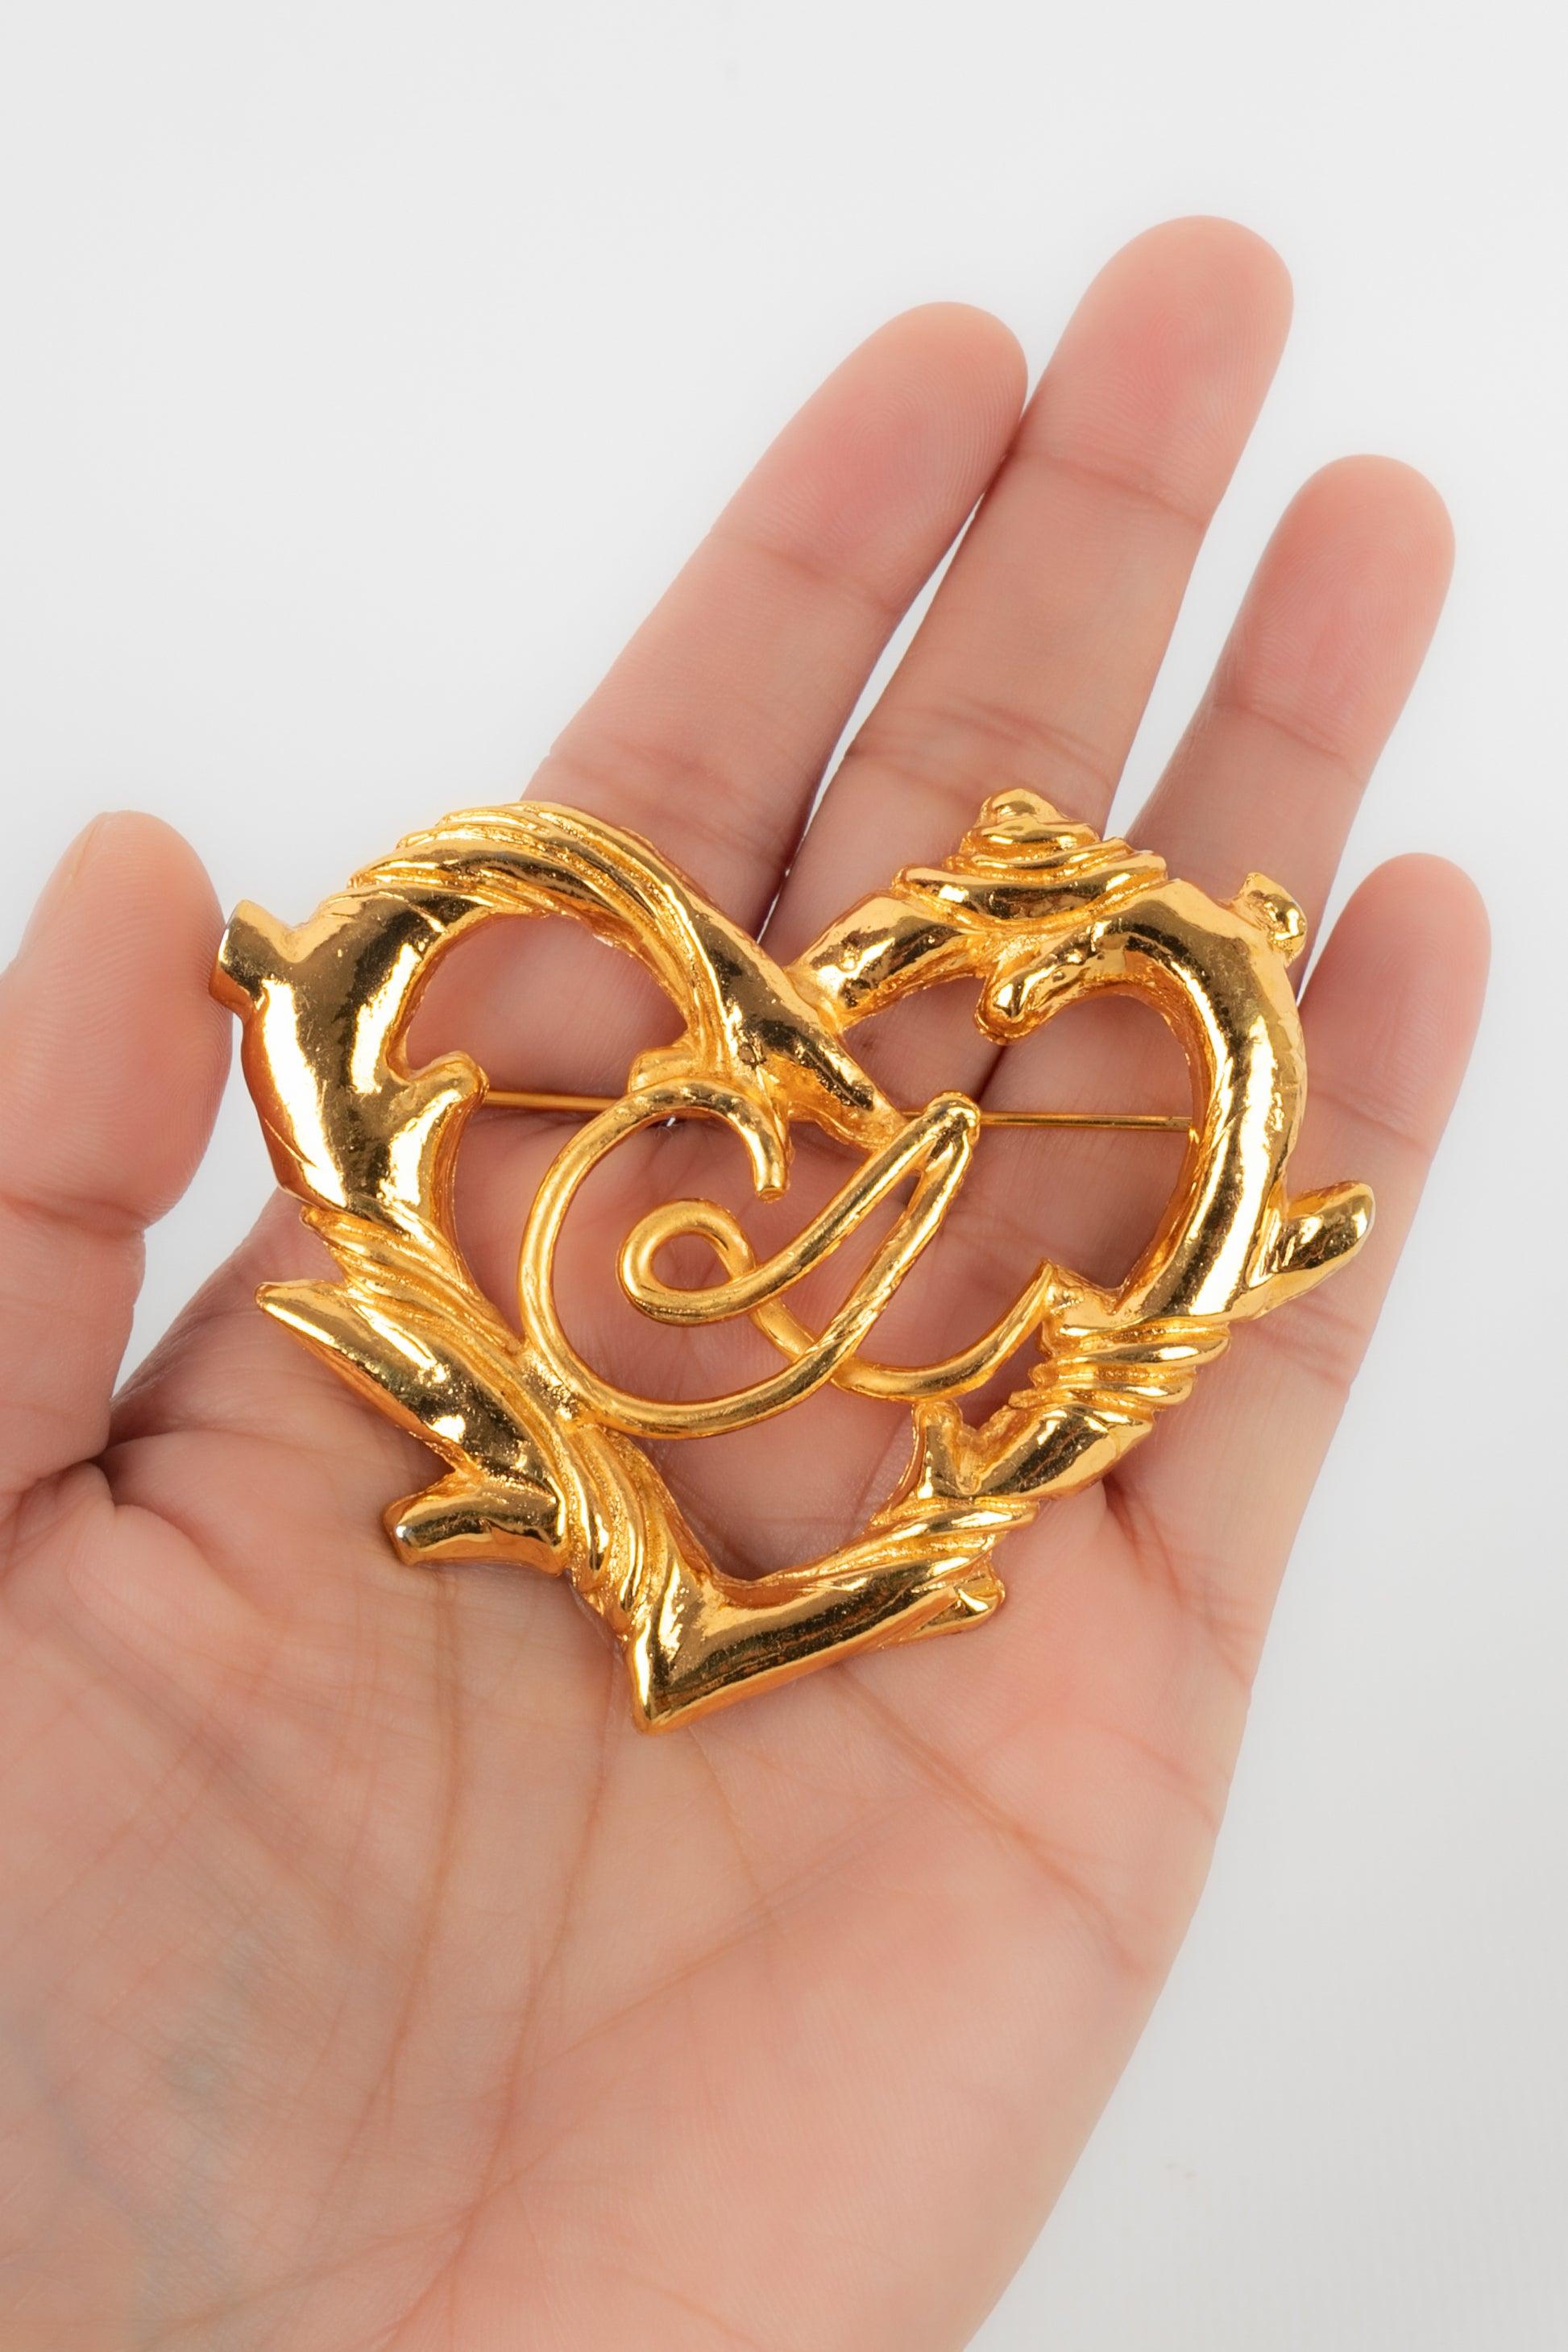 Christian Lacroix - (Made in France) Golden metal openwork brooch.

Additional information:
Condition: Very good condition
Dimensions: Height: 6 cm

Seller Reference: BR77